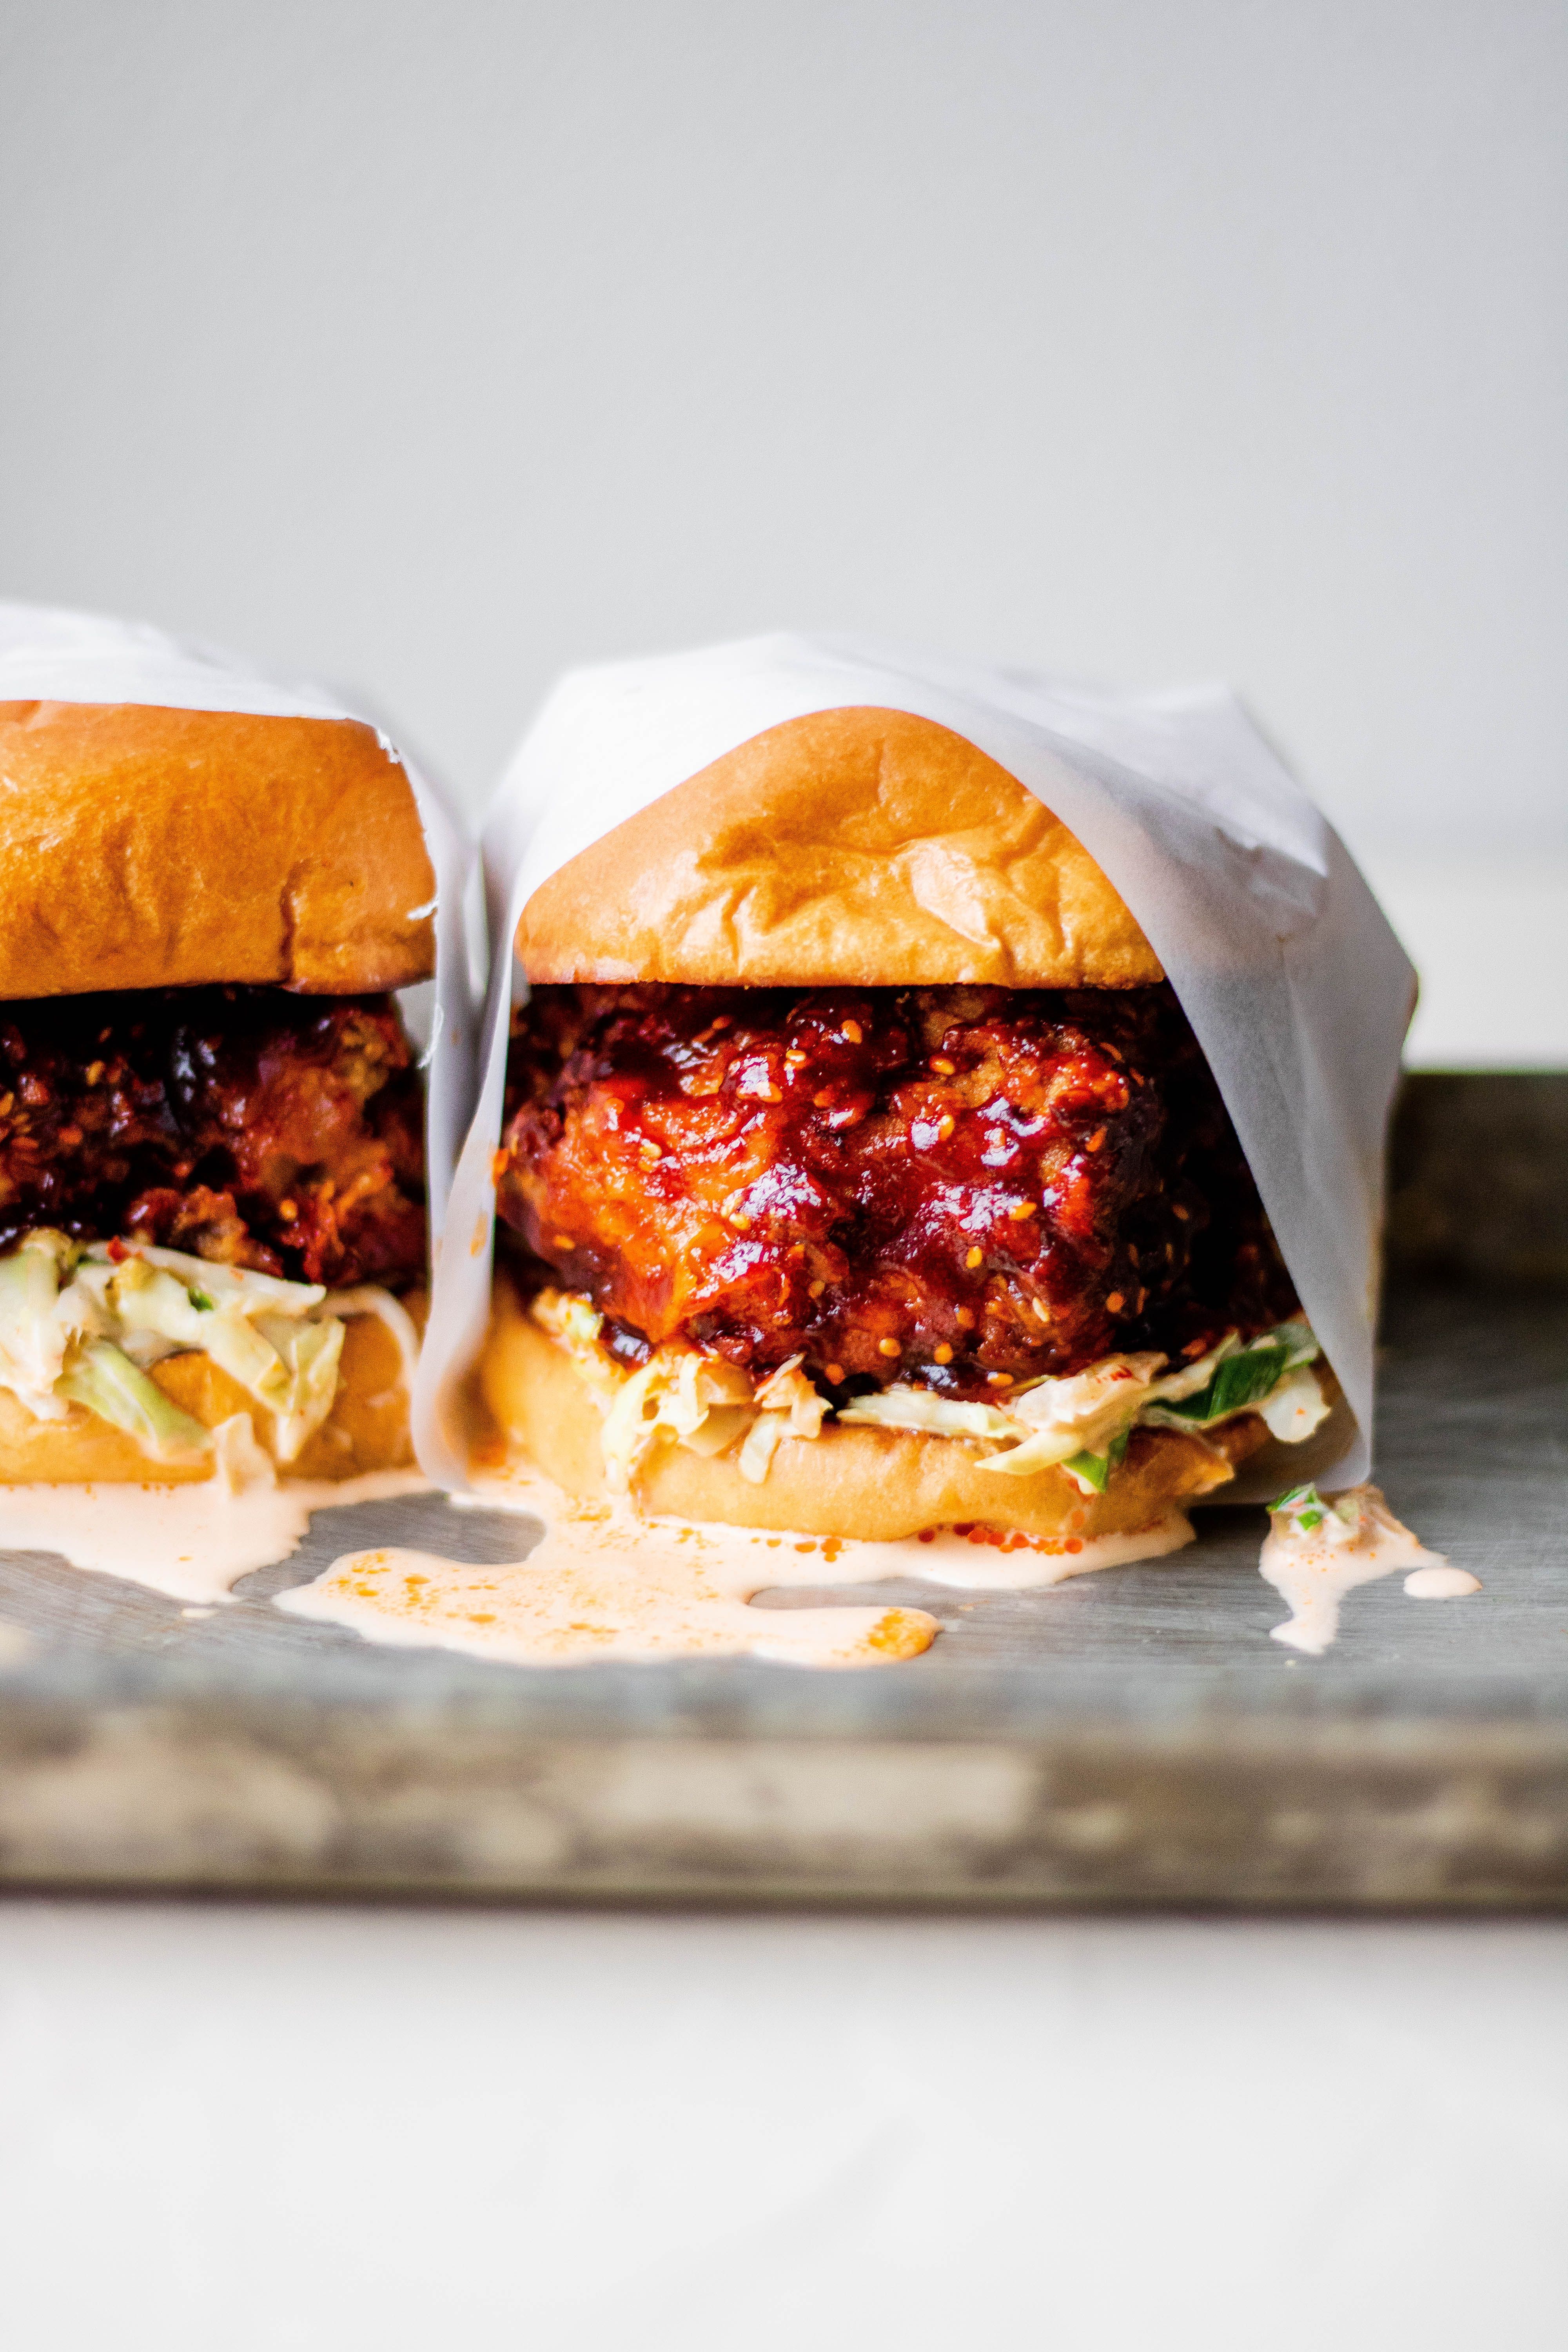 Recipe of the Day: Spicy Fried Chicken Sandwiches by thefeedfeed, | The ...